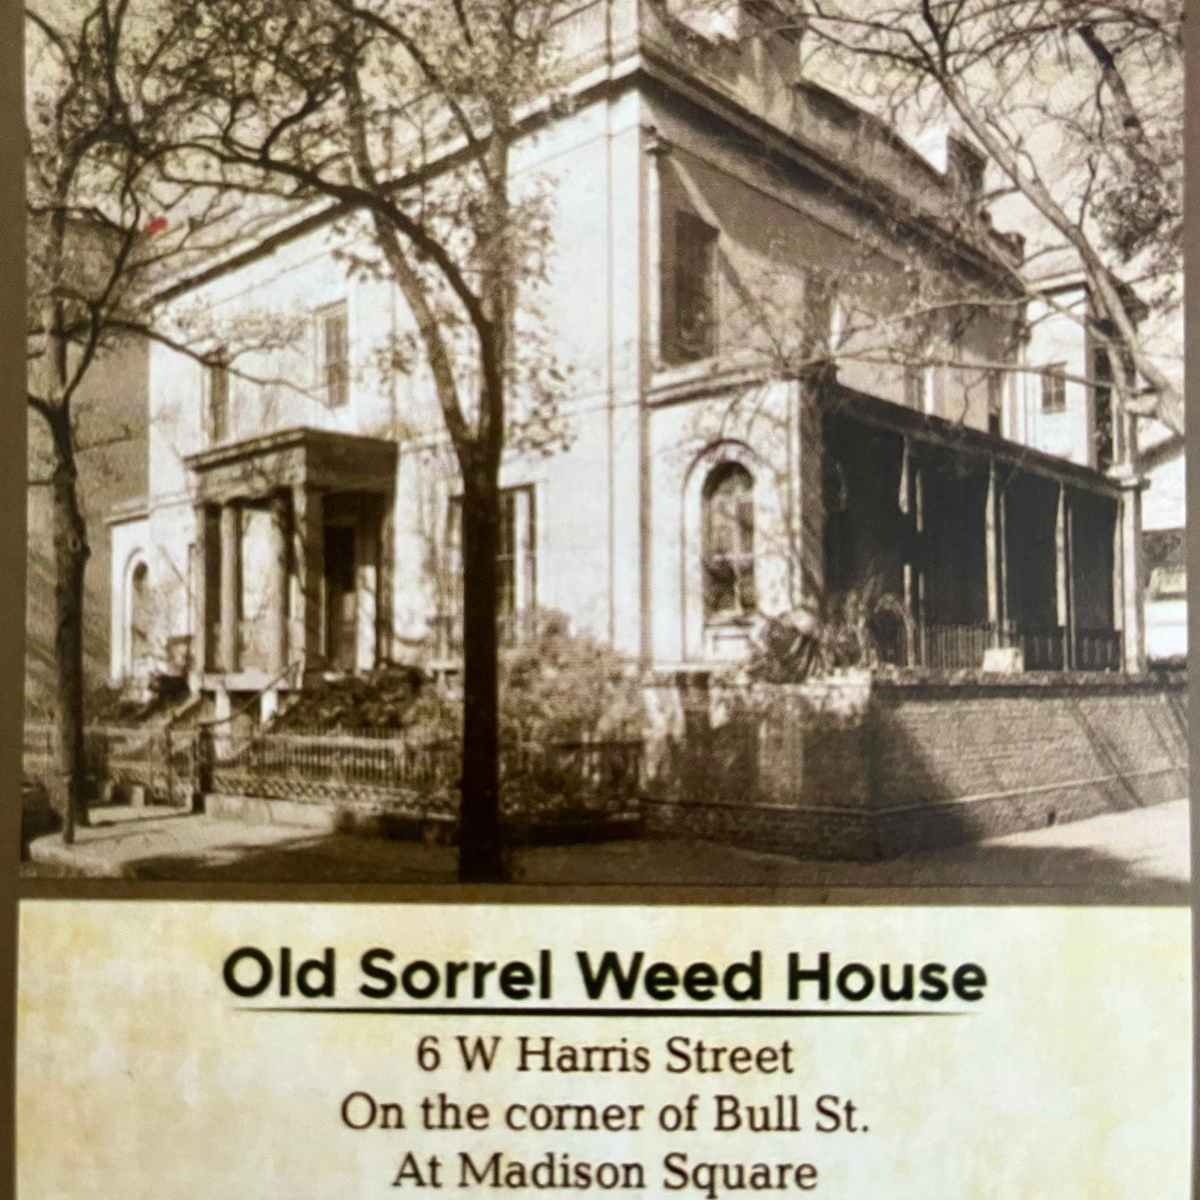 Was I Haunted at the Sorrel Weed House?